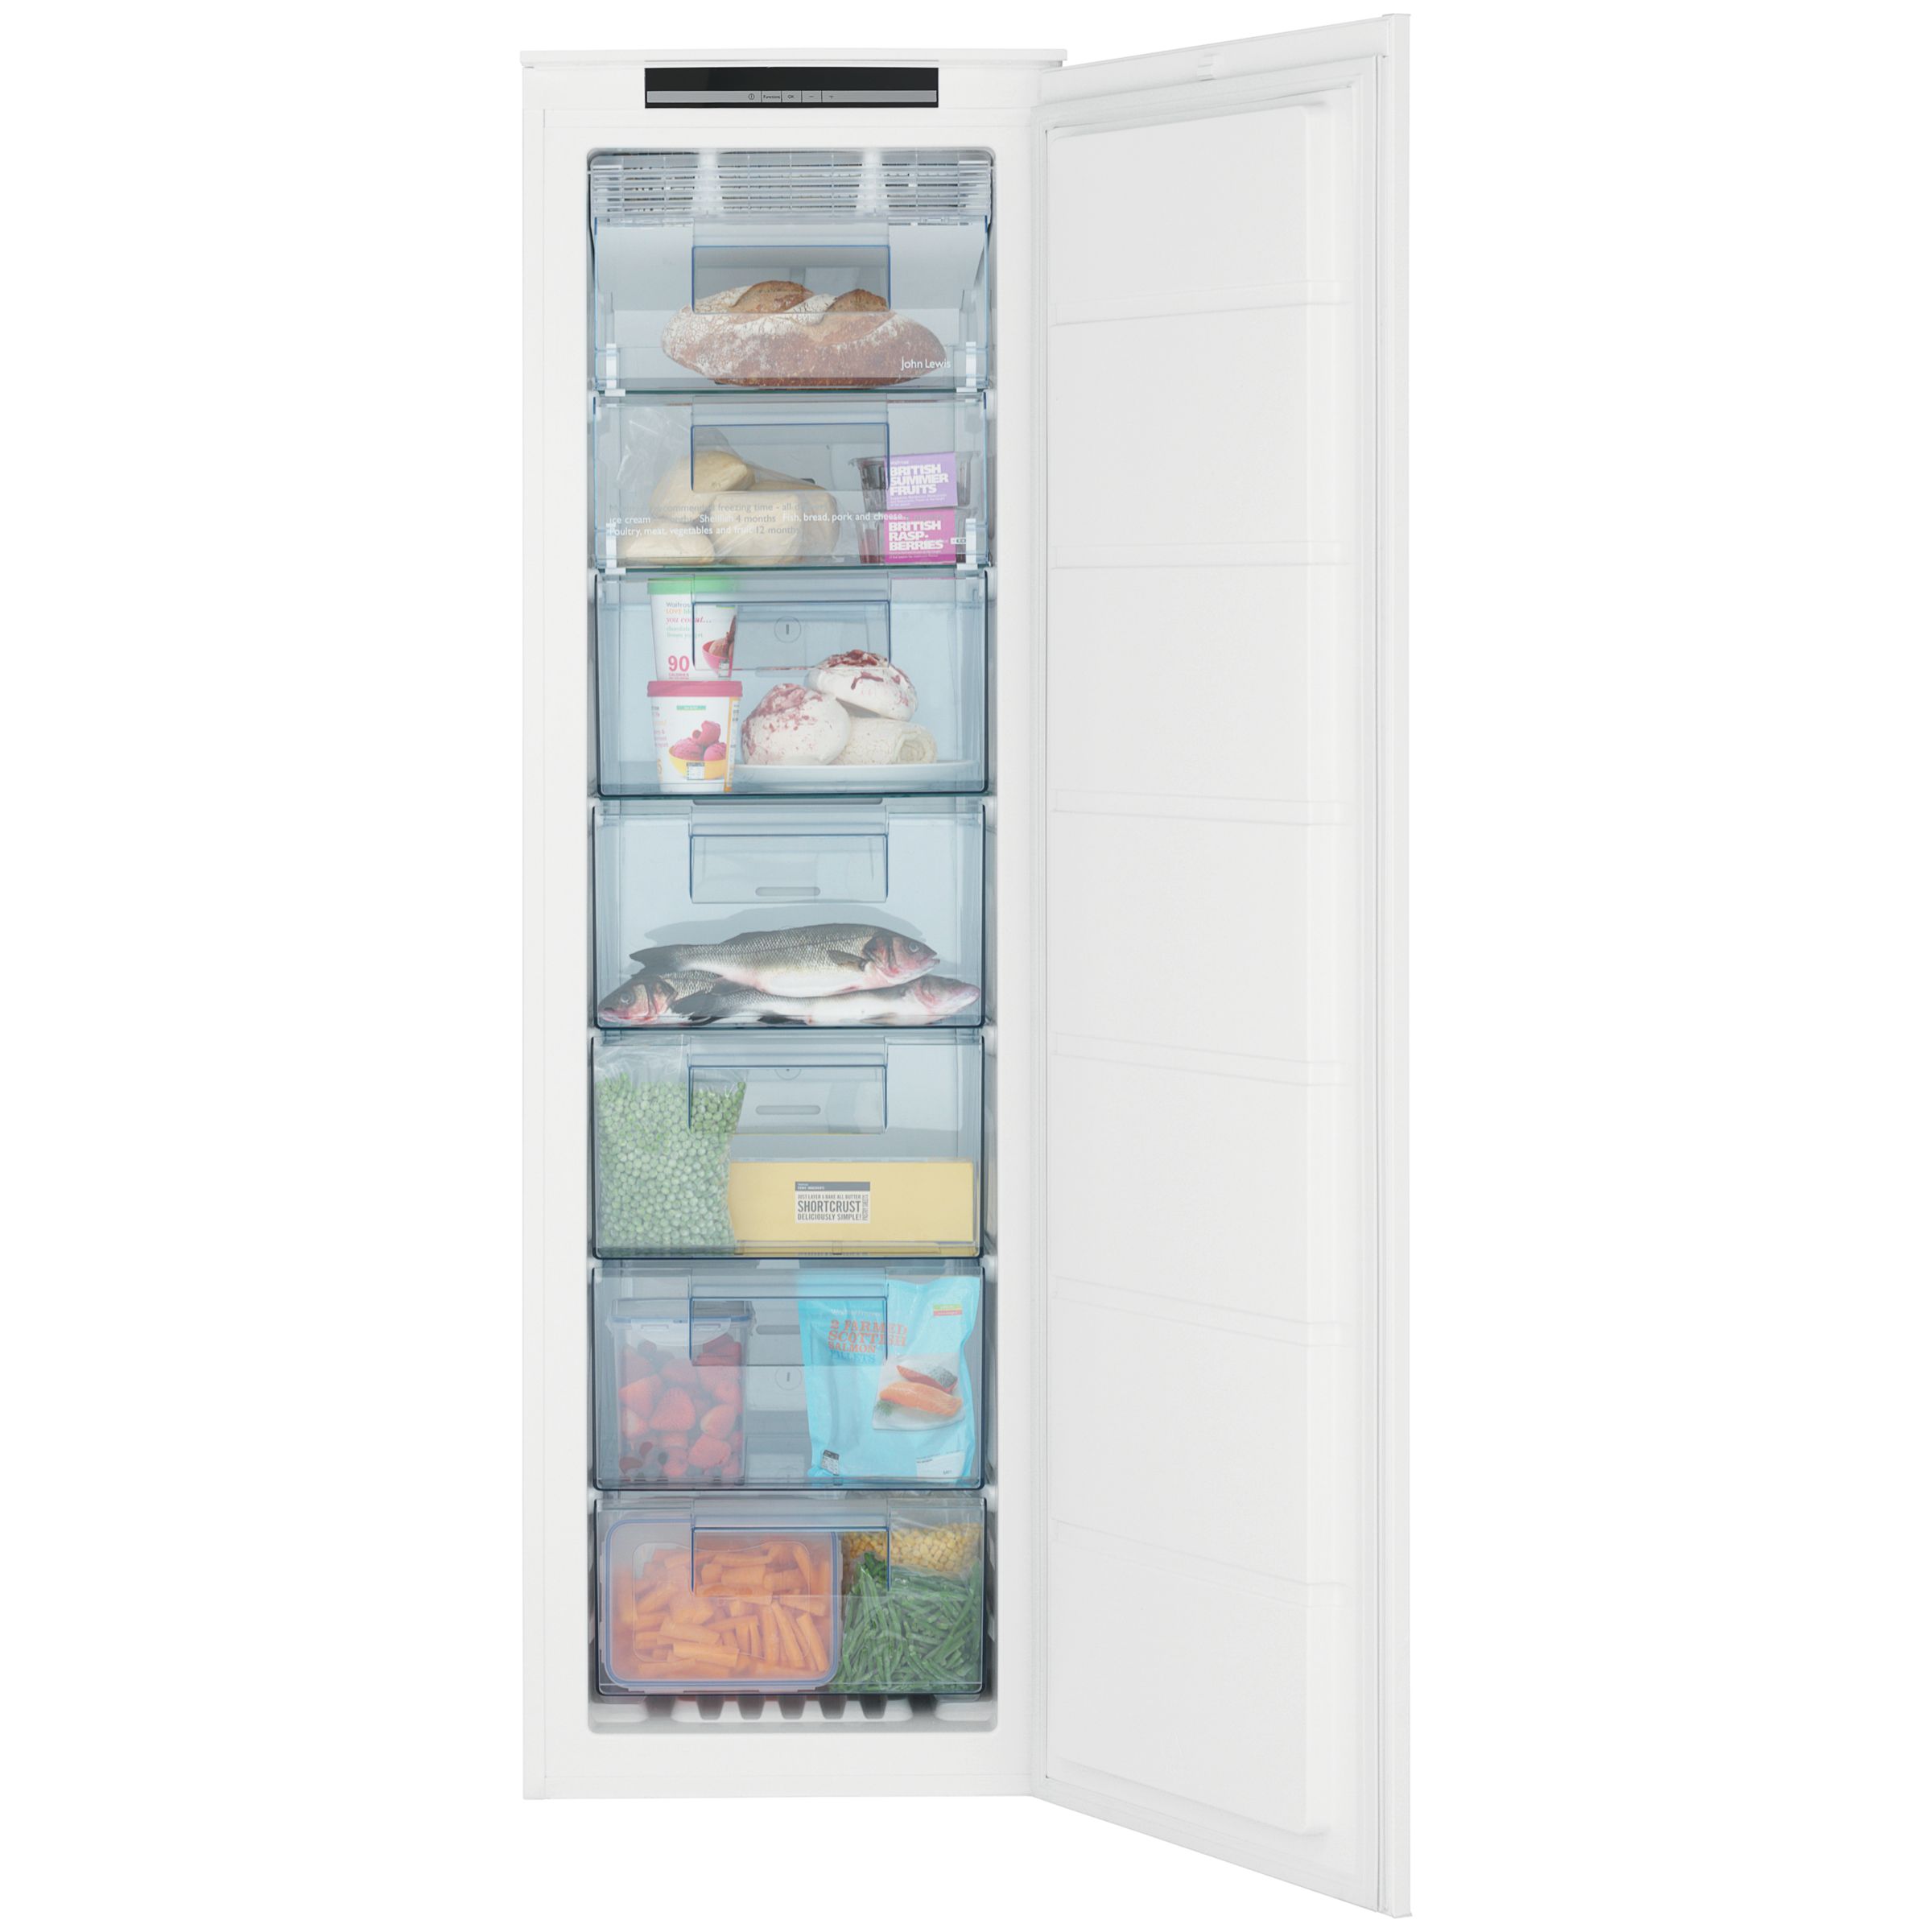 John Lewis & Partners JLBIFIC05 Tall Integrated No Frost Freezer, A+ Energy Rating, 54cm Wide